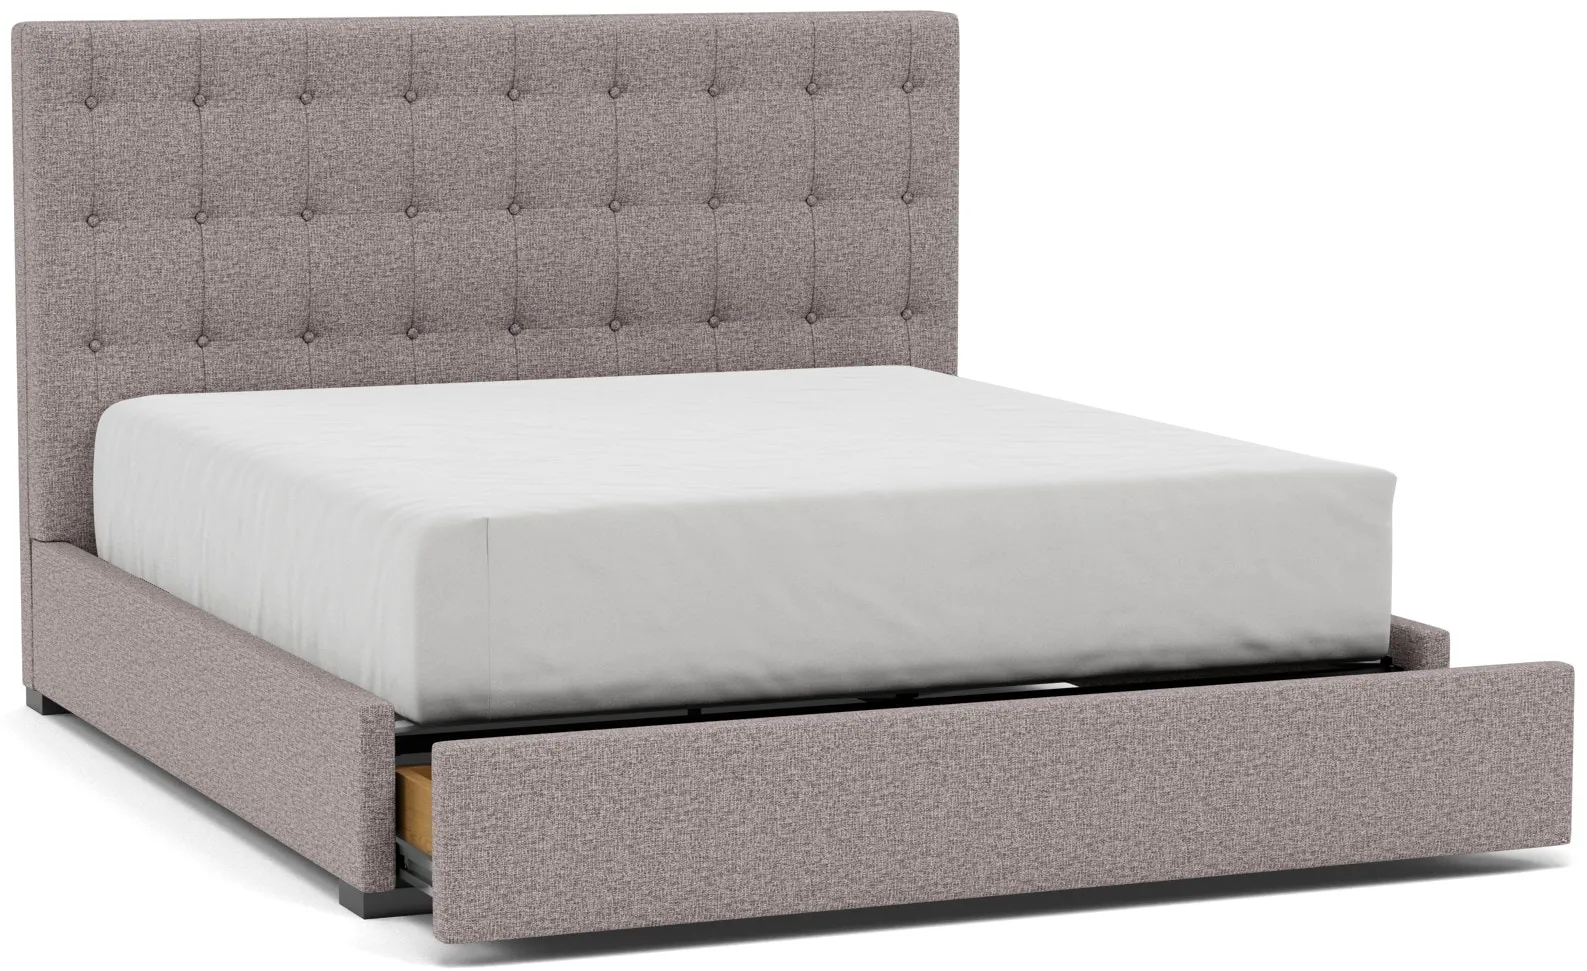 Abby King Upholstered Storage Bed in Tech Brownstone